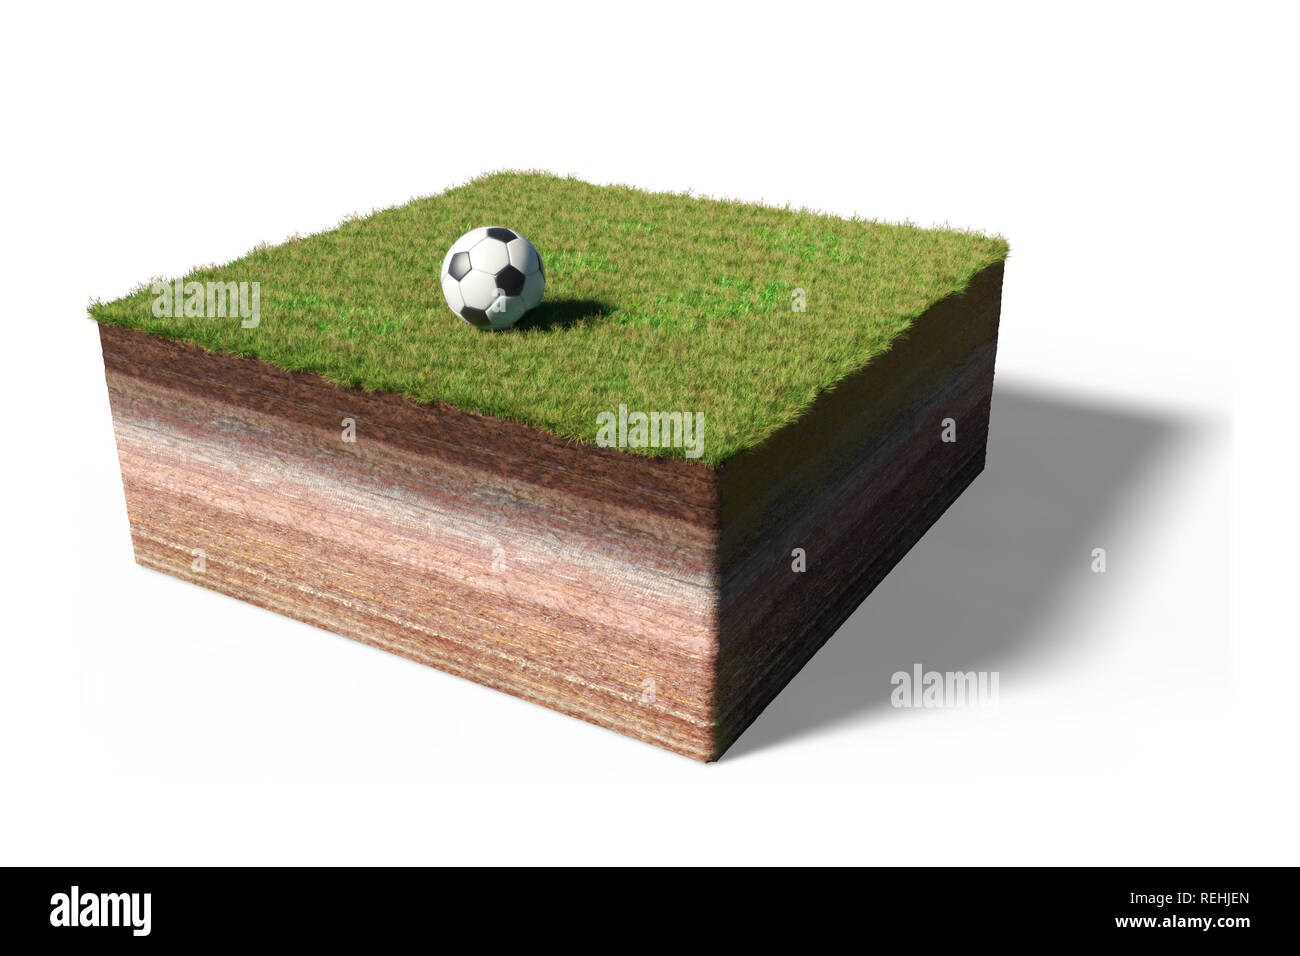 model of a cross section of ground with soccer ball on soccer field (3d illustration, isolated with shadow on white background) Stock Photo